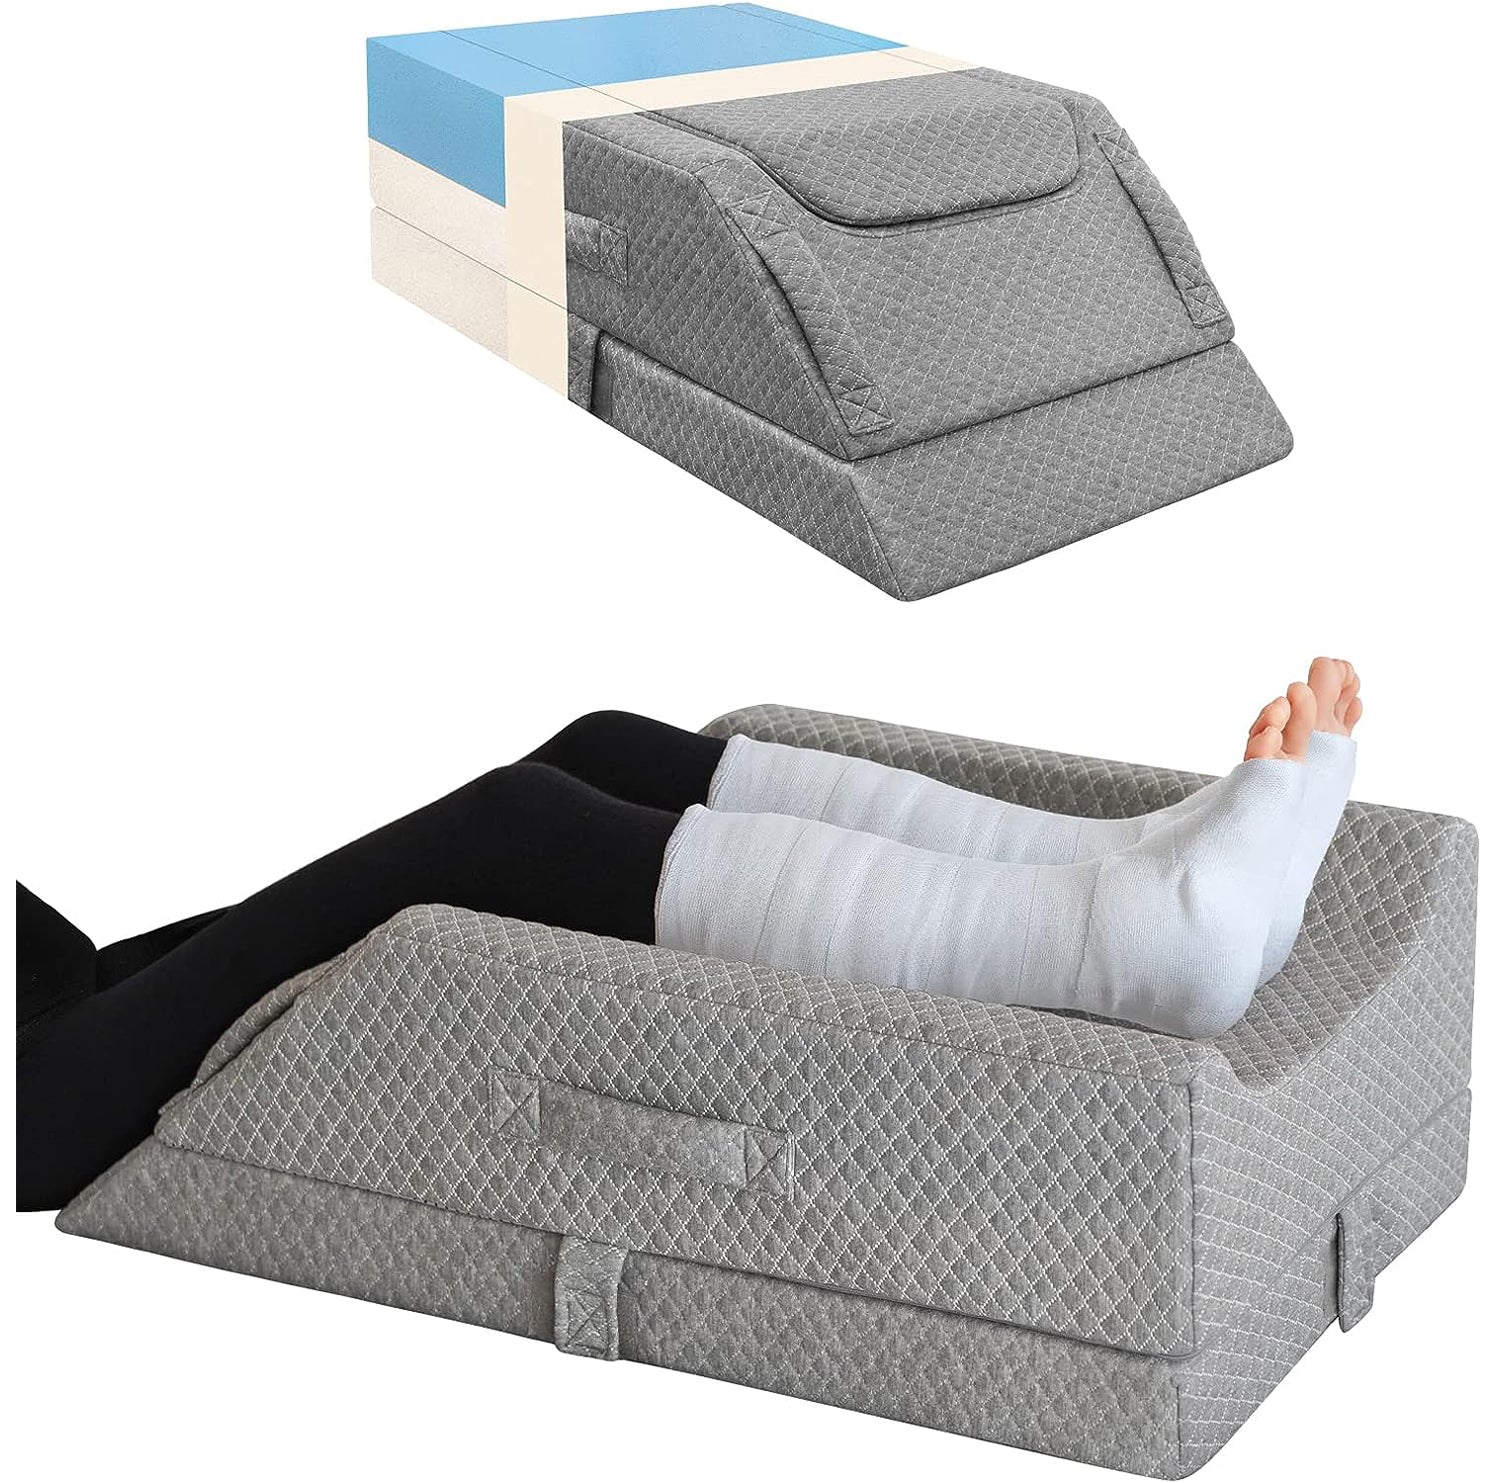 KingPavonini® Adjustable Leg Elevation Pillows for Swelling After Surgery